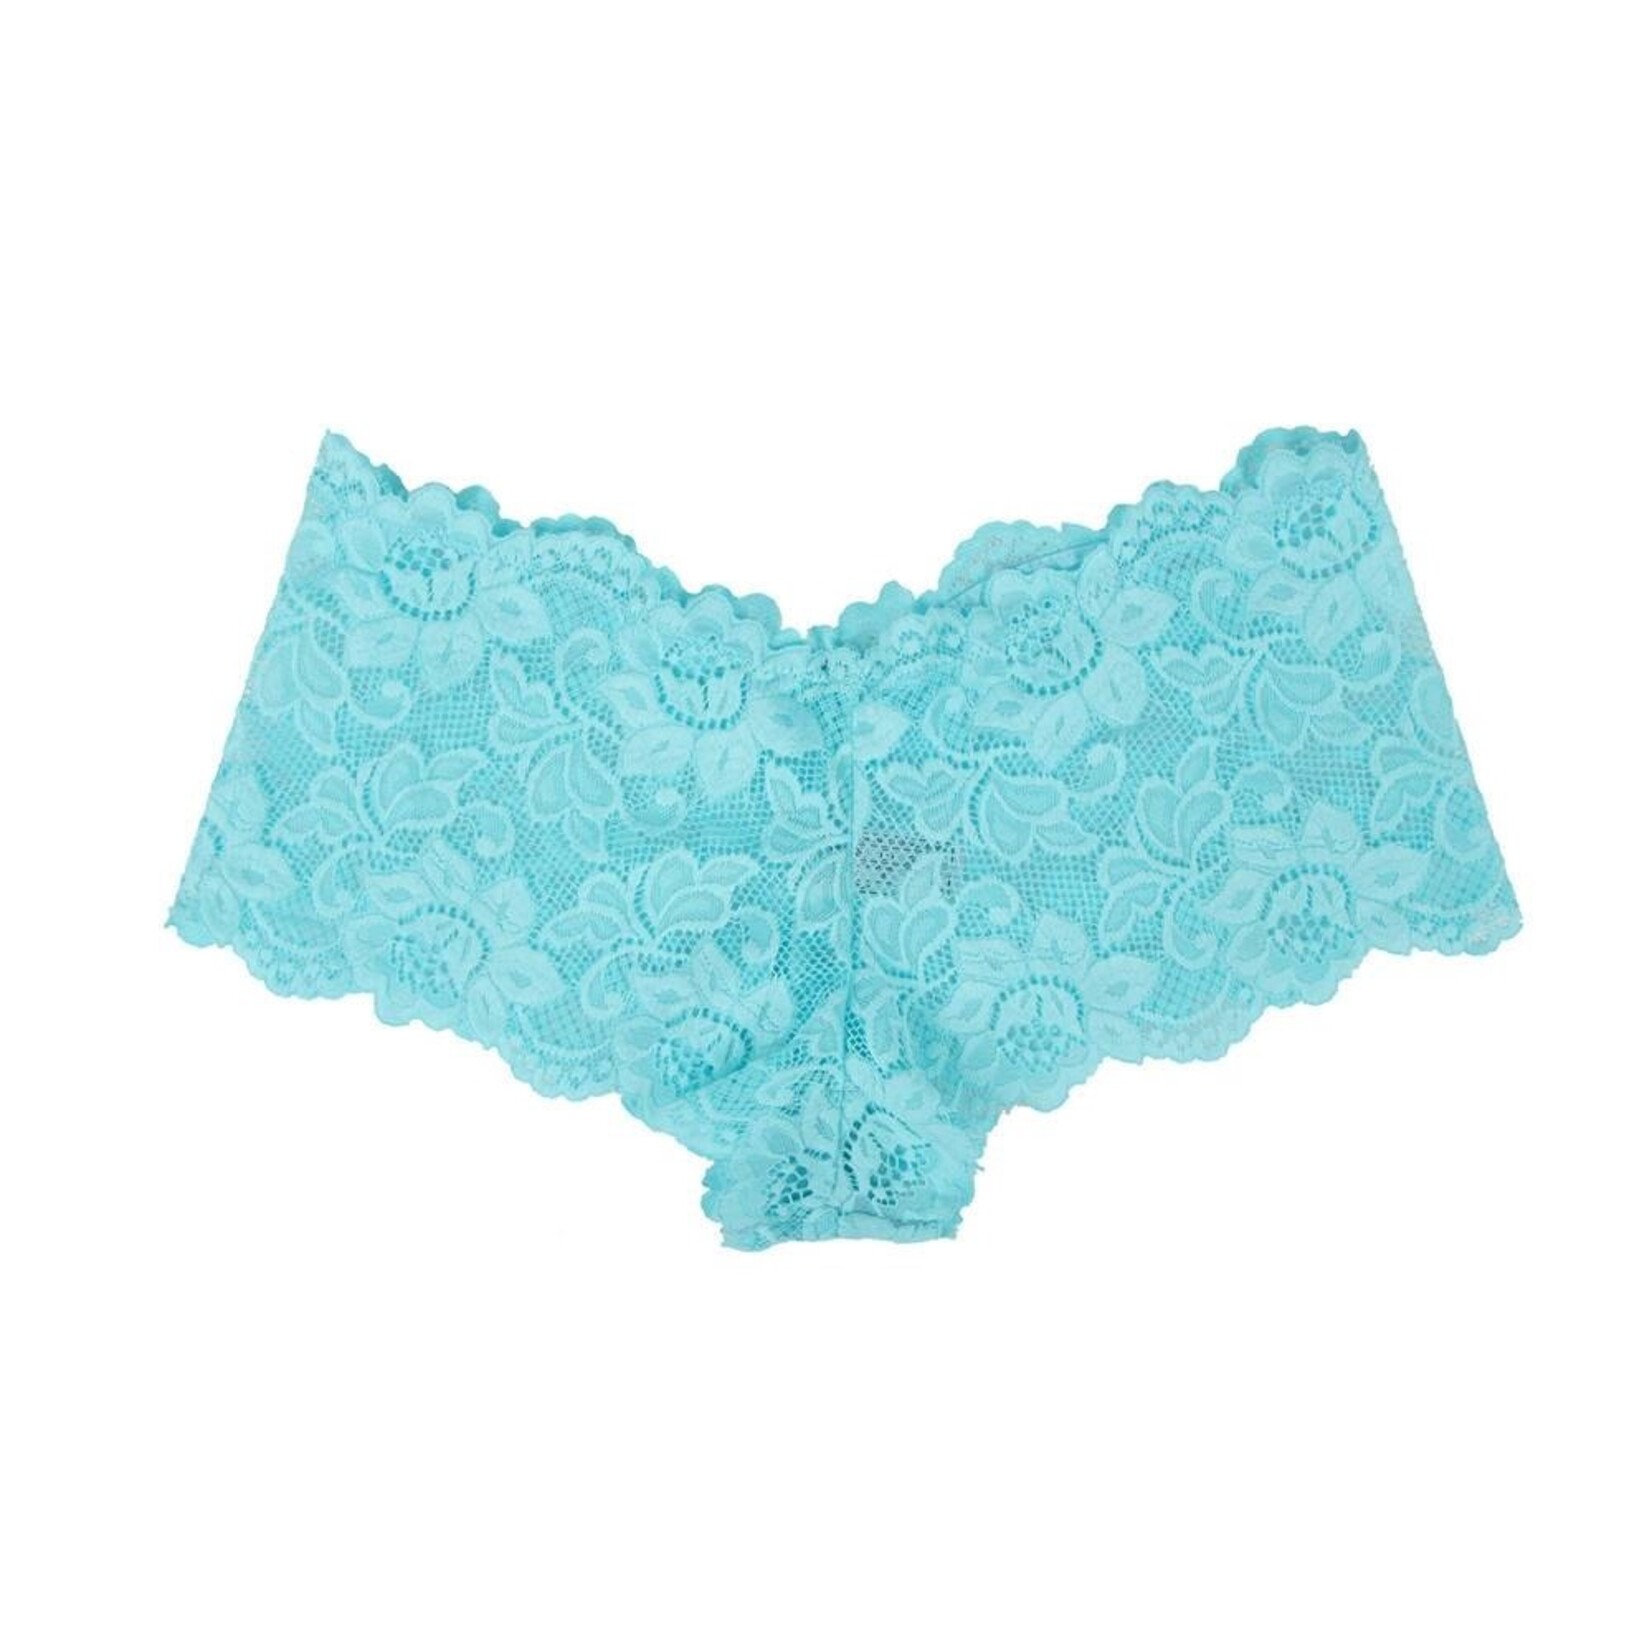 OH YEAH! -  BLUE SEXY FLORAL LACE PANTY S-M